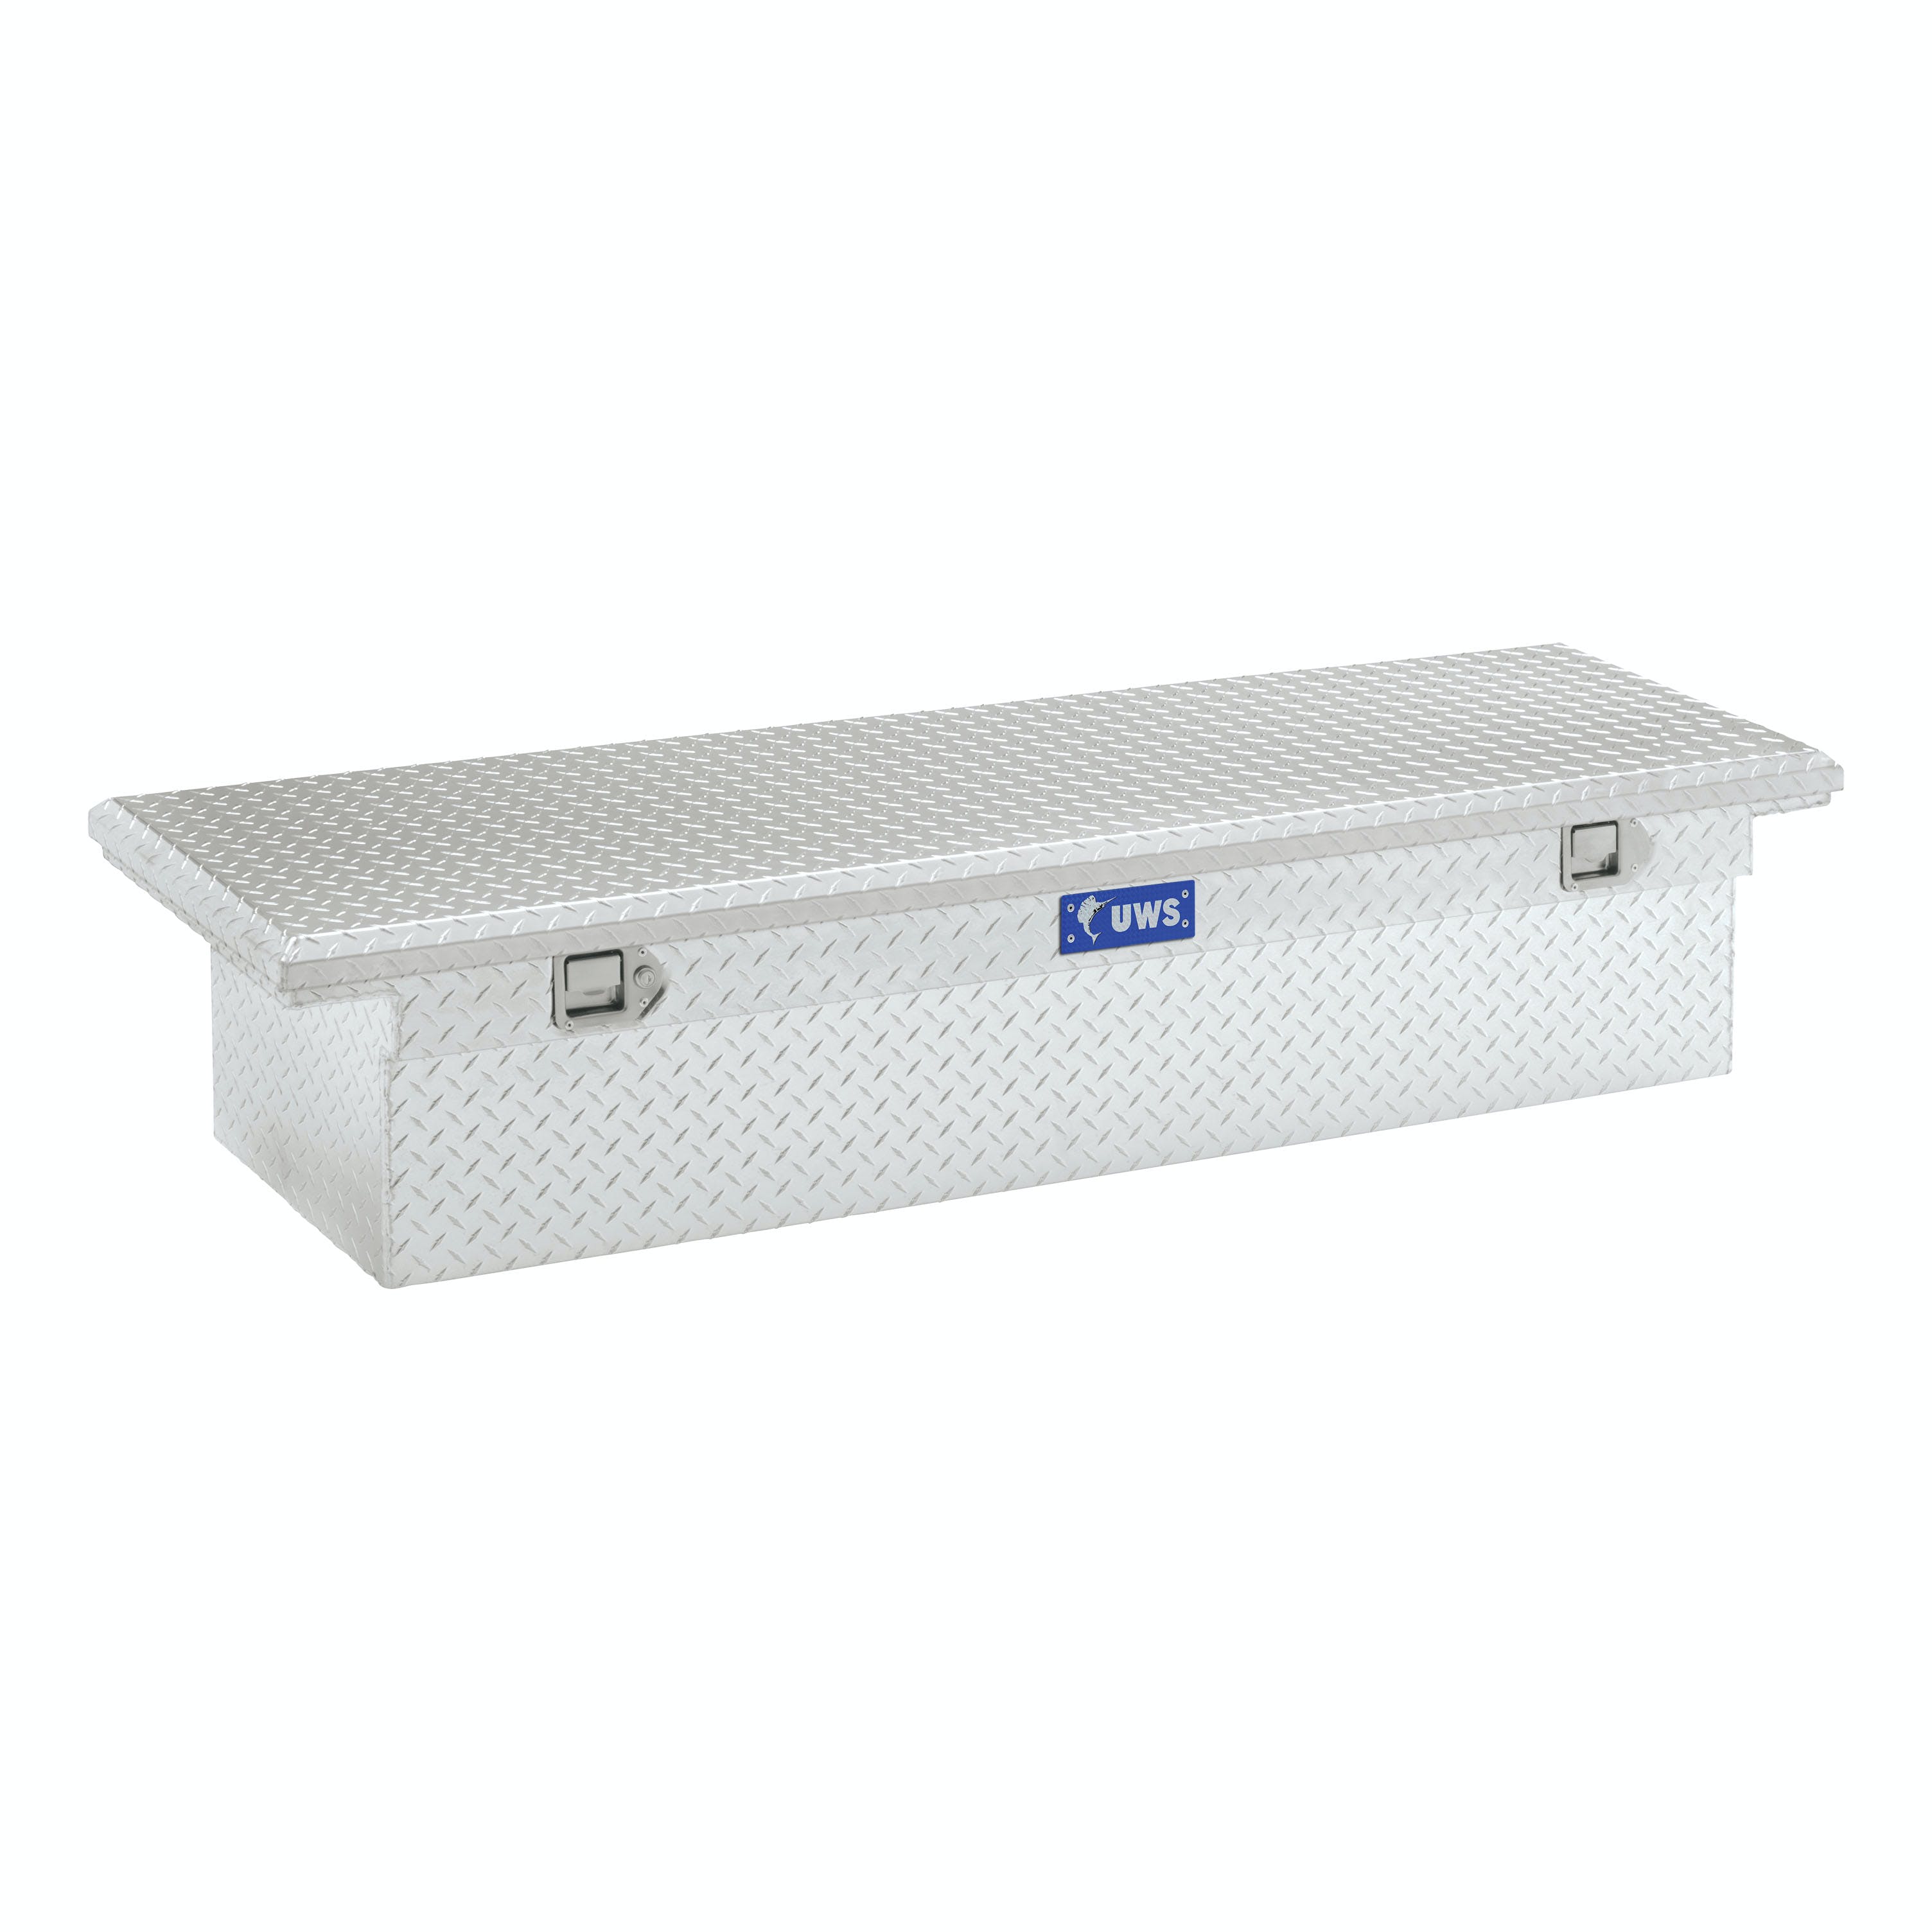 UWS TBS-66-LP 66 inch Aluminum Single Lid Crossover Toolbox Low Profile